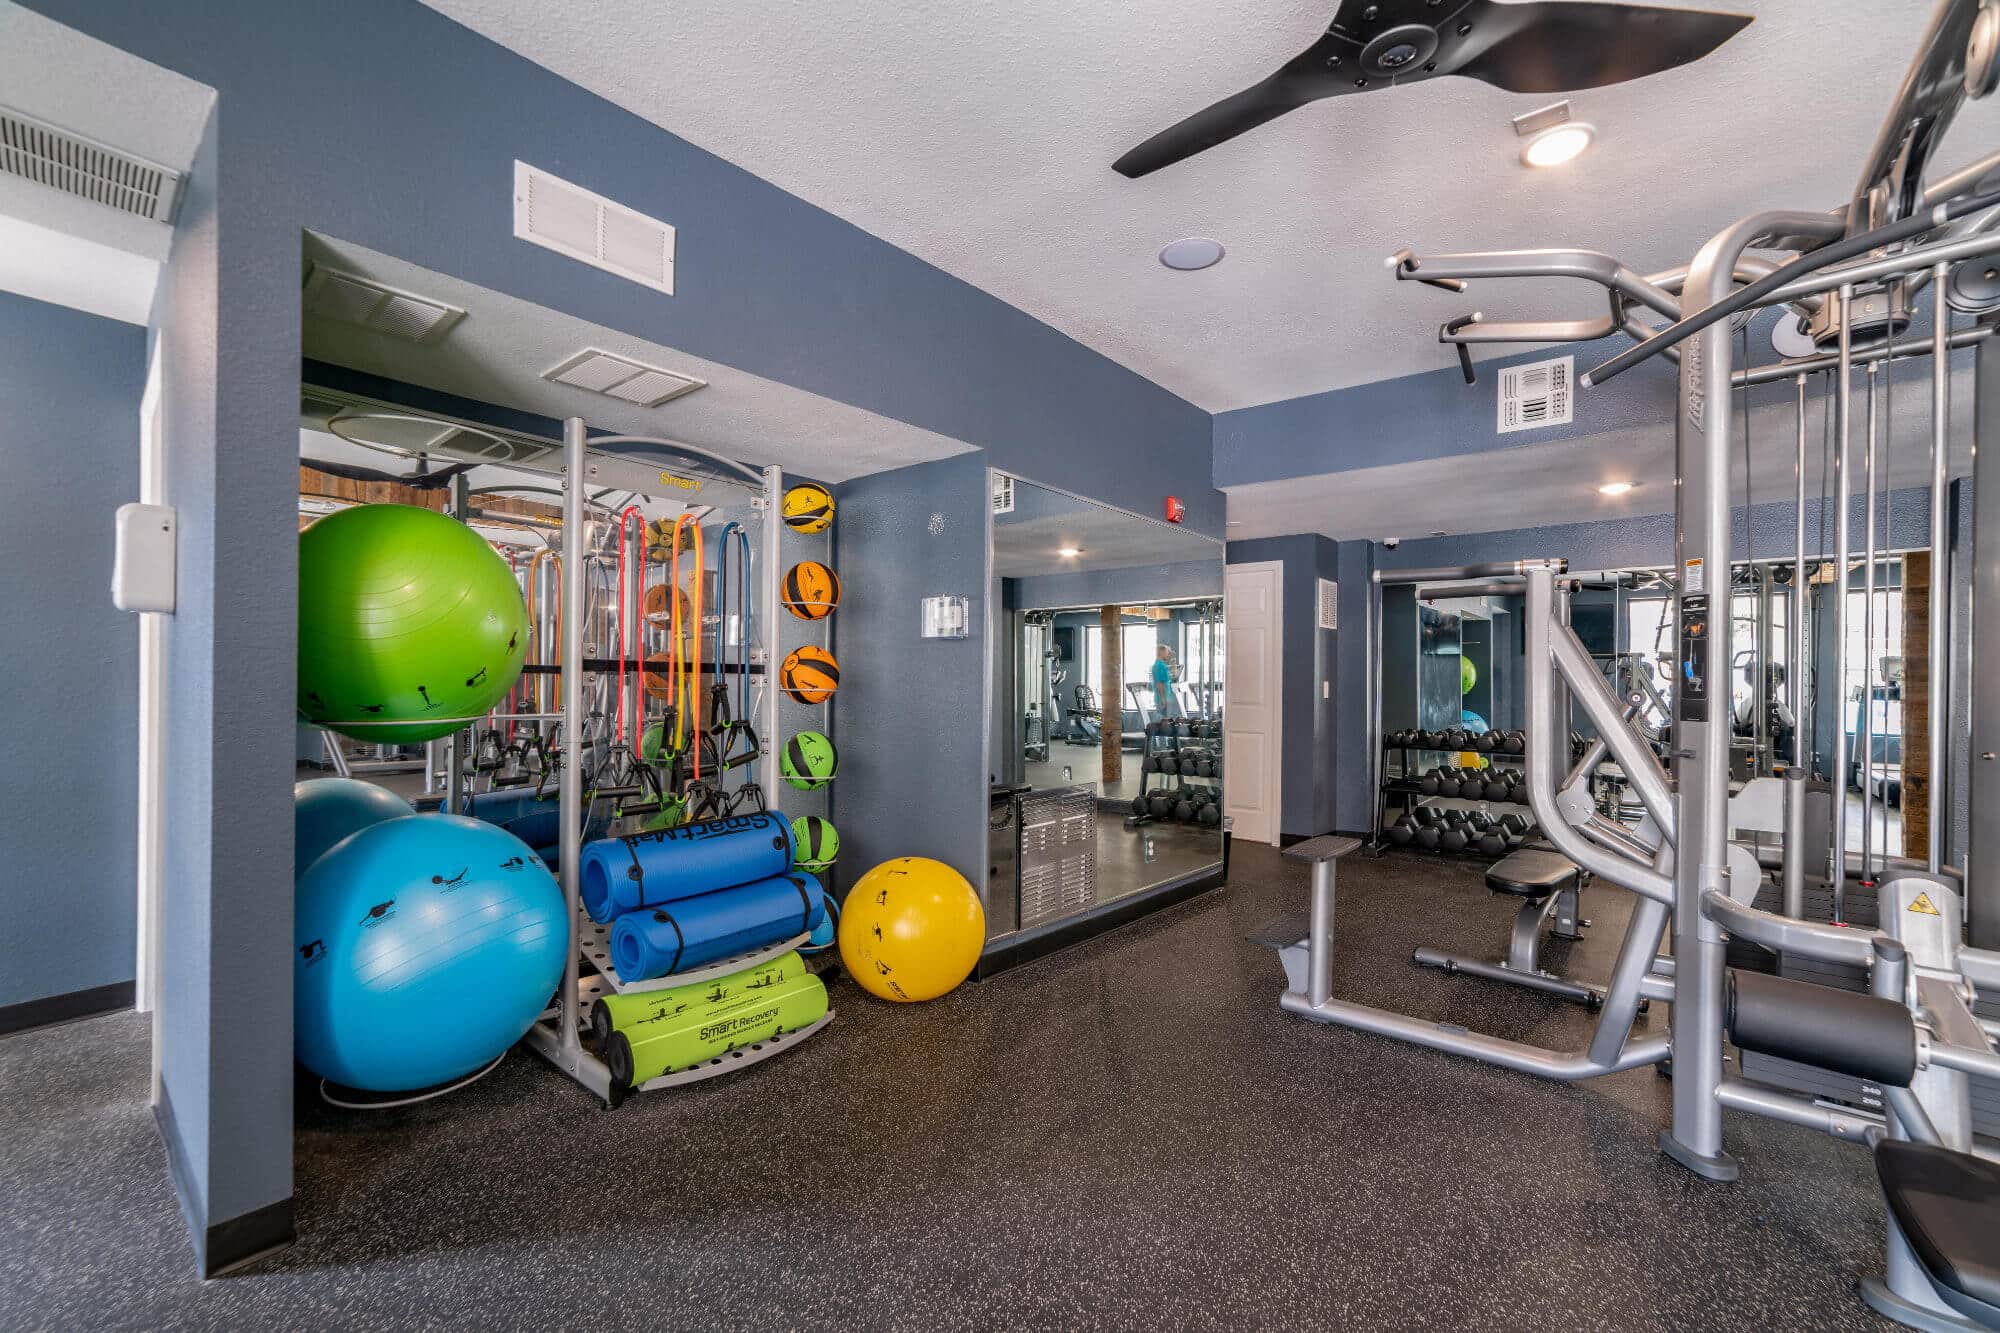 arden villas off campus apartments near the university of central florida ucf orlando resident clubhouse fitness center medicine balls and equipment